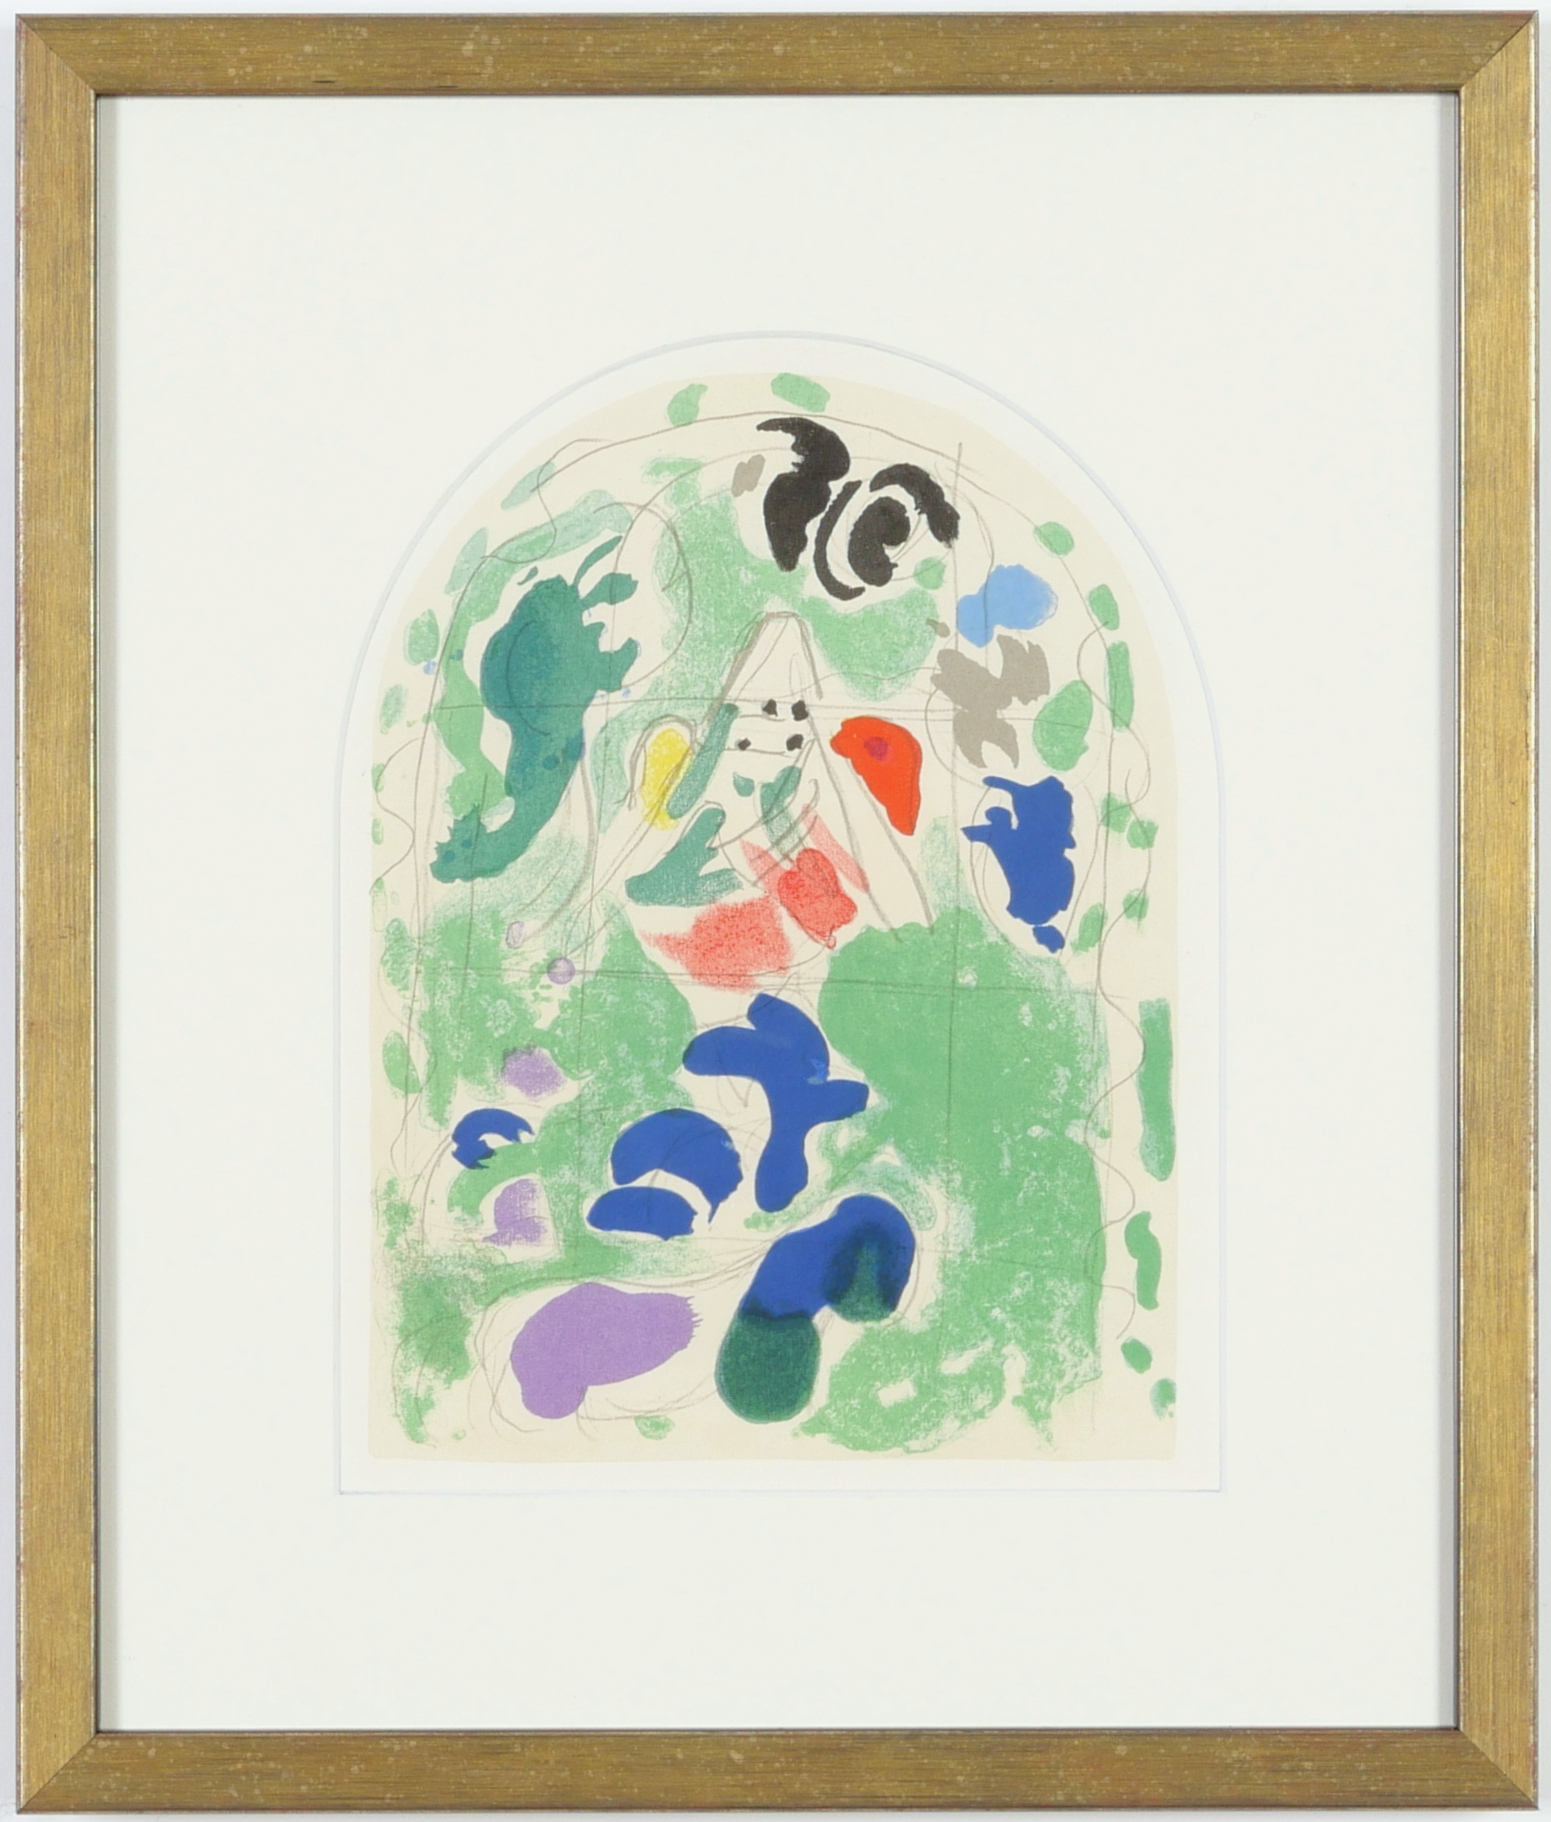 MARC CHAGALL, The Twelve Tribes, twelve lithographs in colour, printed in Paris by Mourlot 1962, - Image 7 of 13